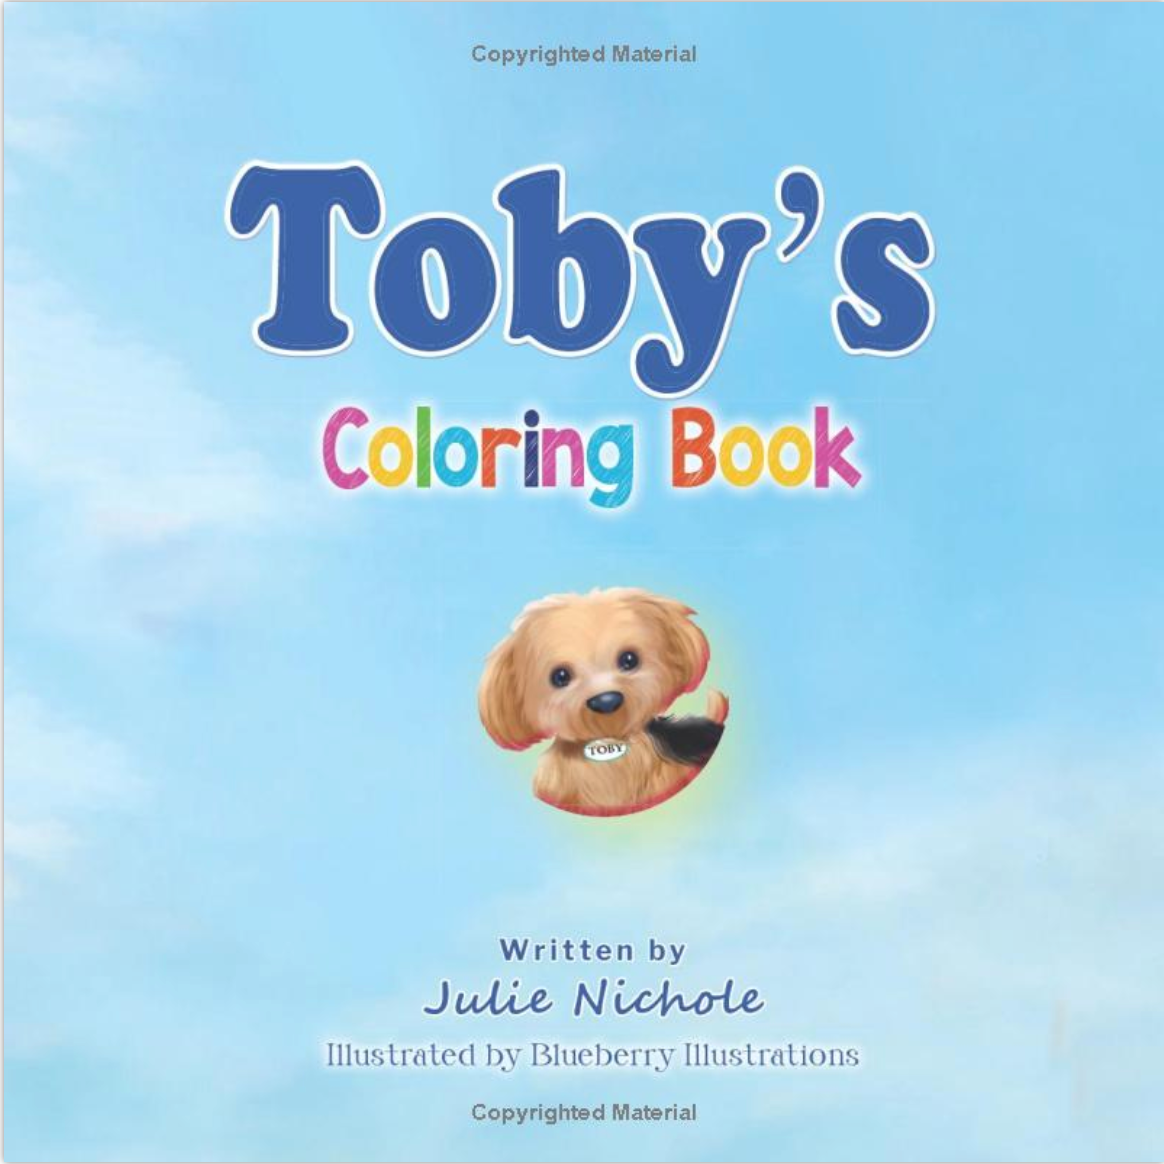 Toby's Children Coloring Book